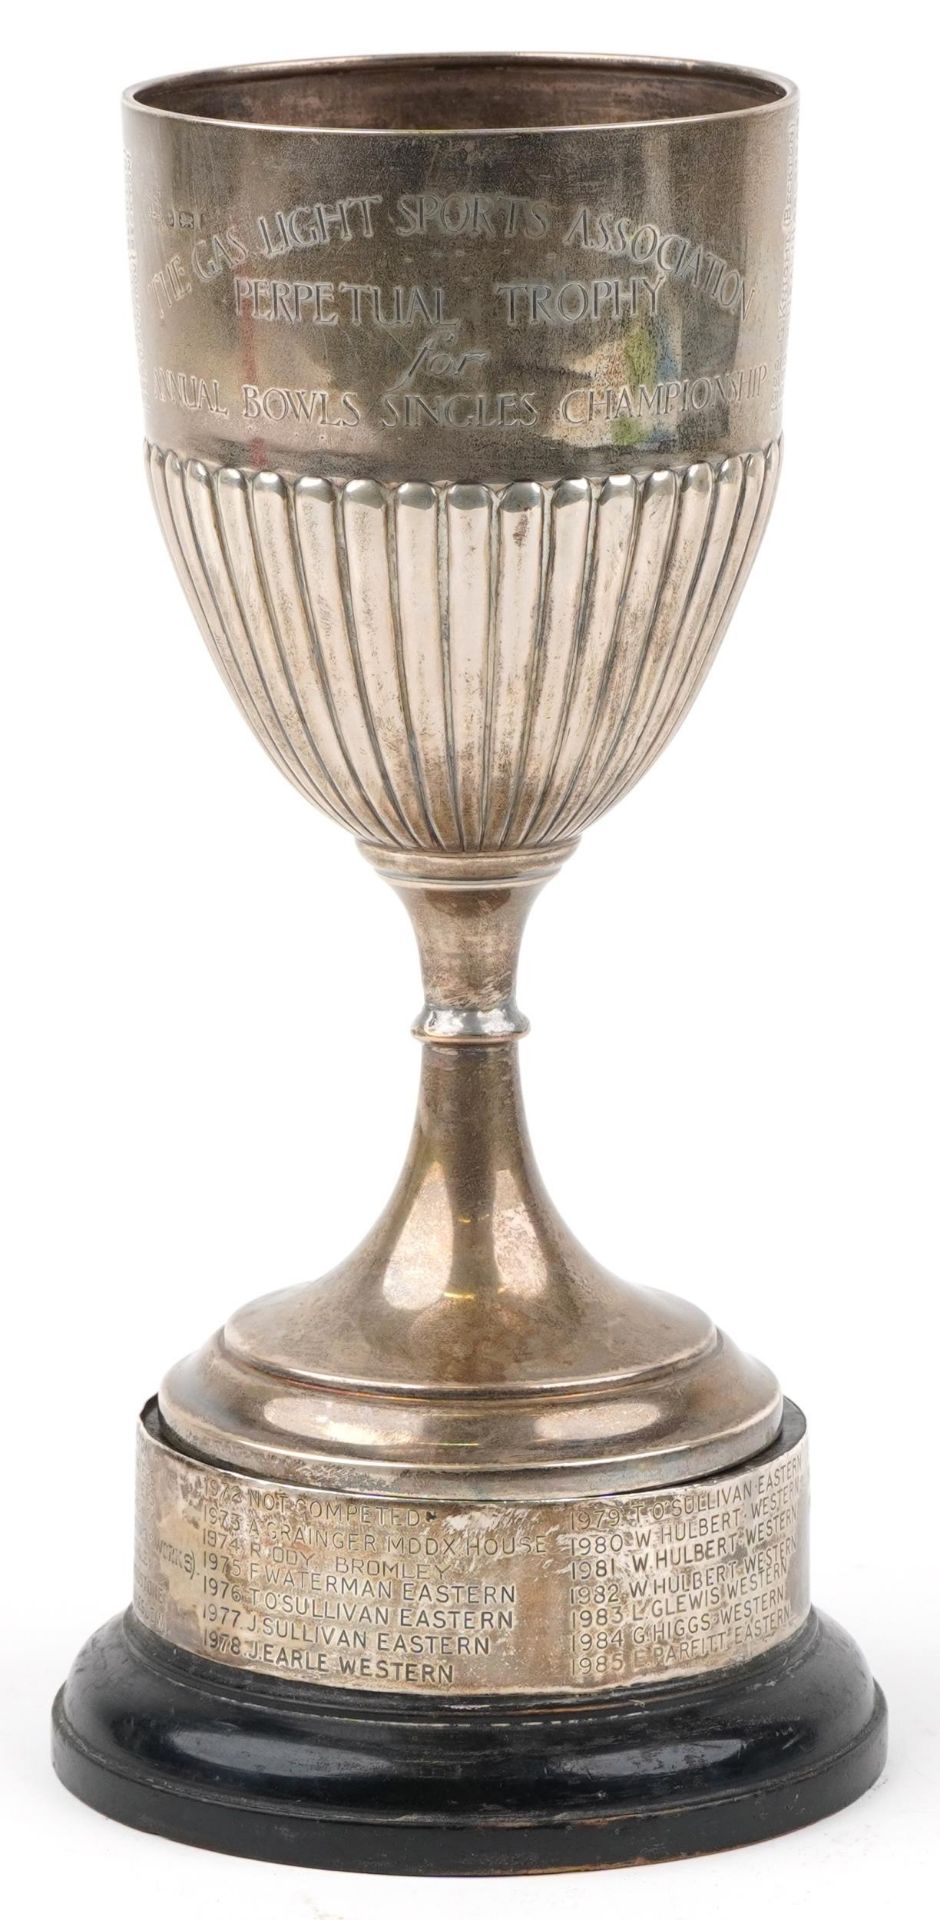 George V bowling interest silver trophy on stand engraved The Gas Light Sports Association Perpetual